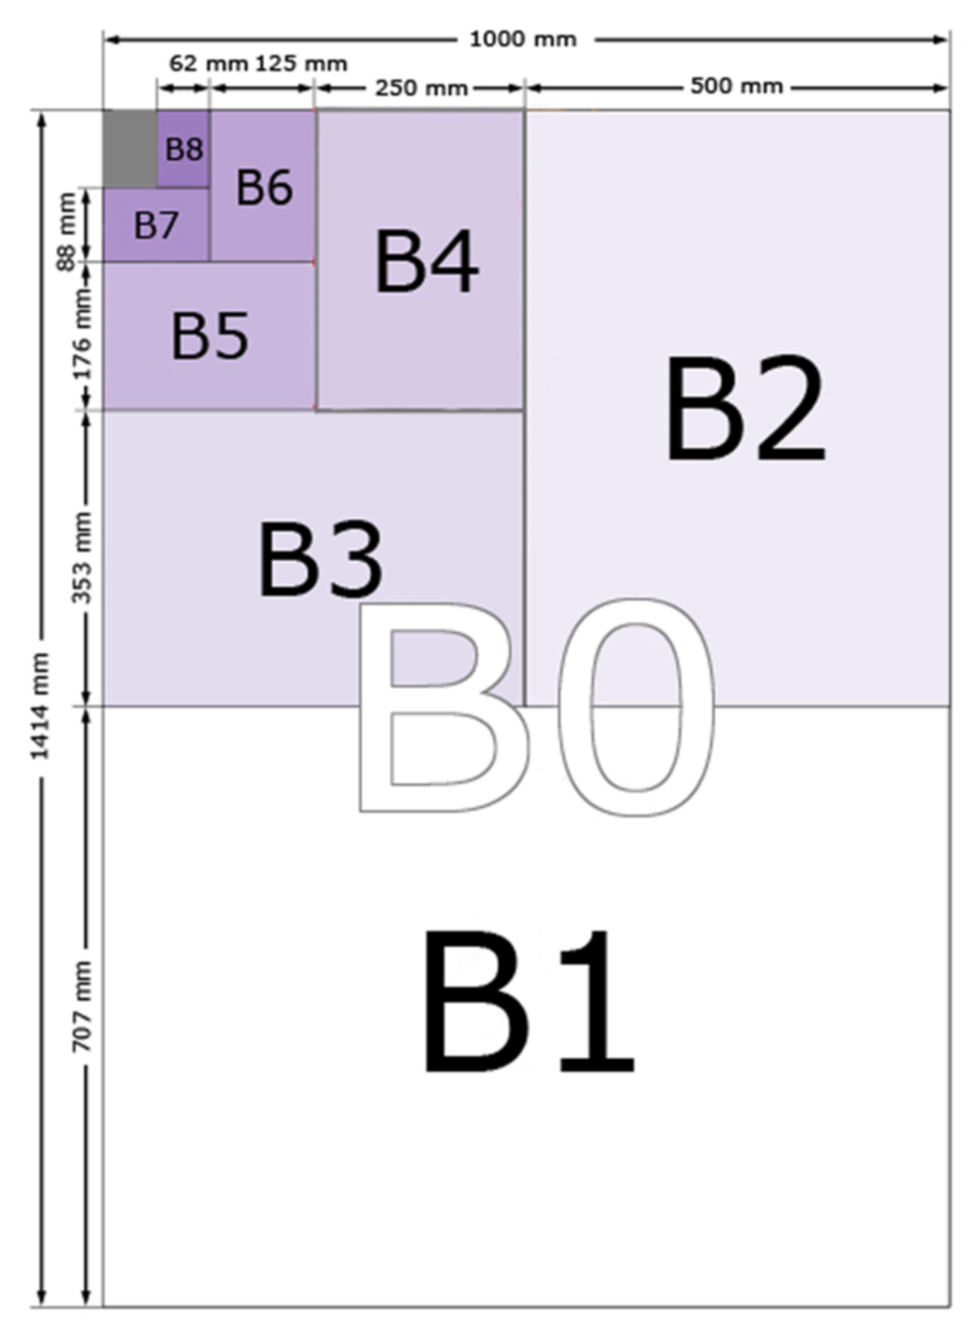 Diagram of B Paper Sizes & Their Relationships